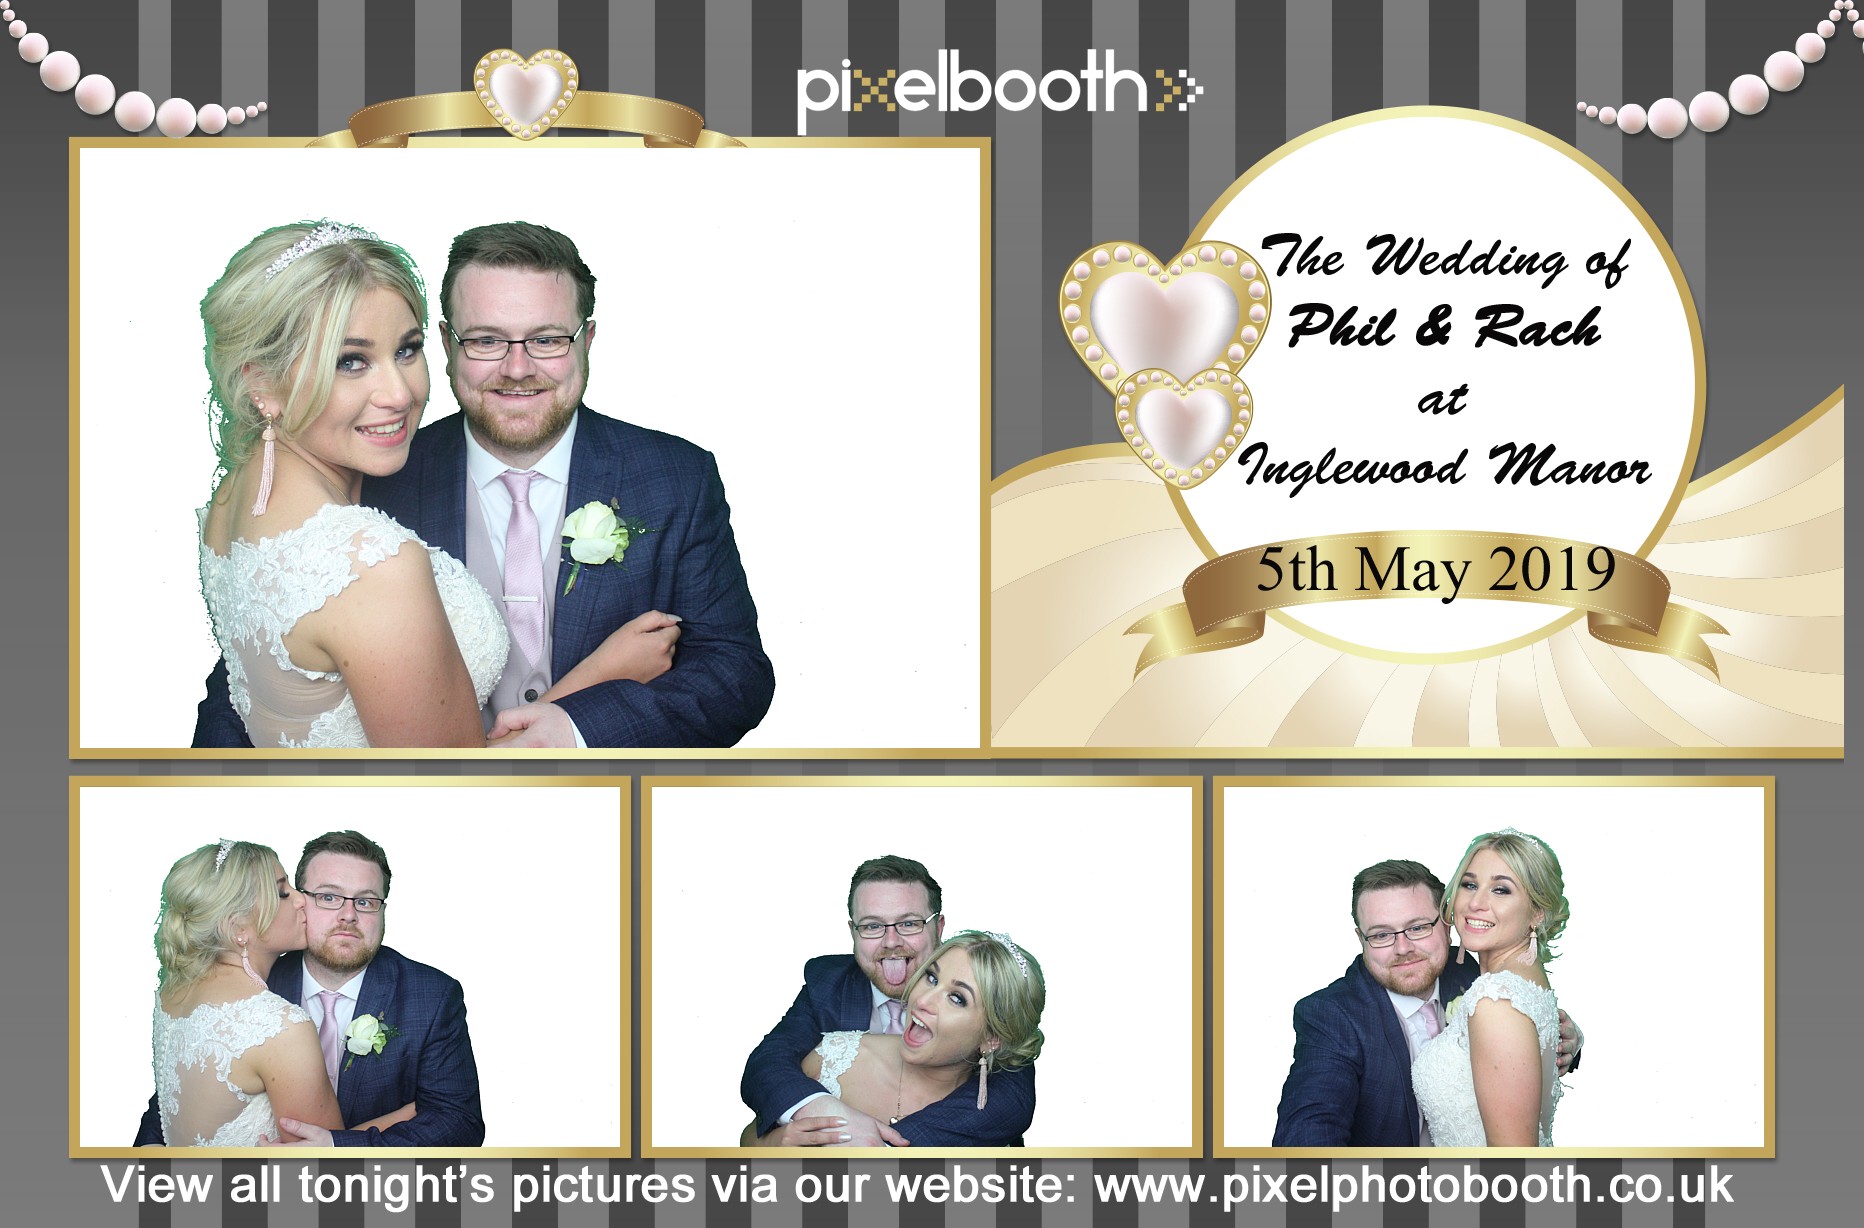 5th May 2019: Rach and Phil's Wedding at Inglewood